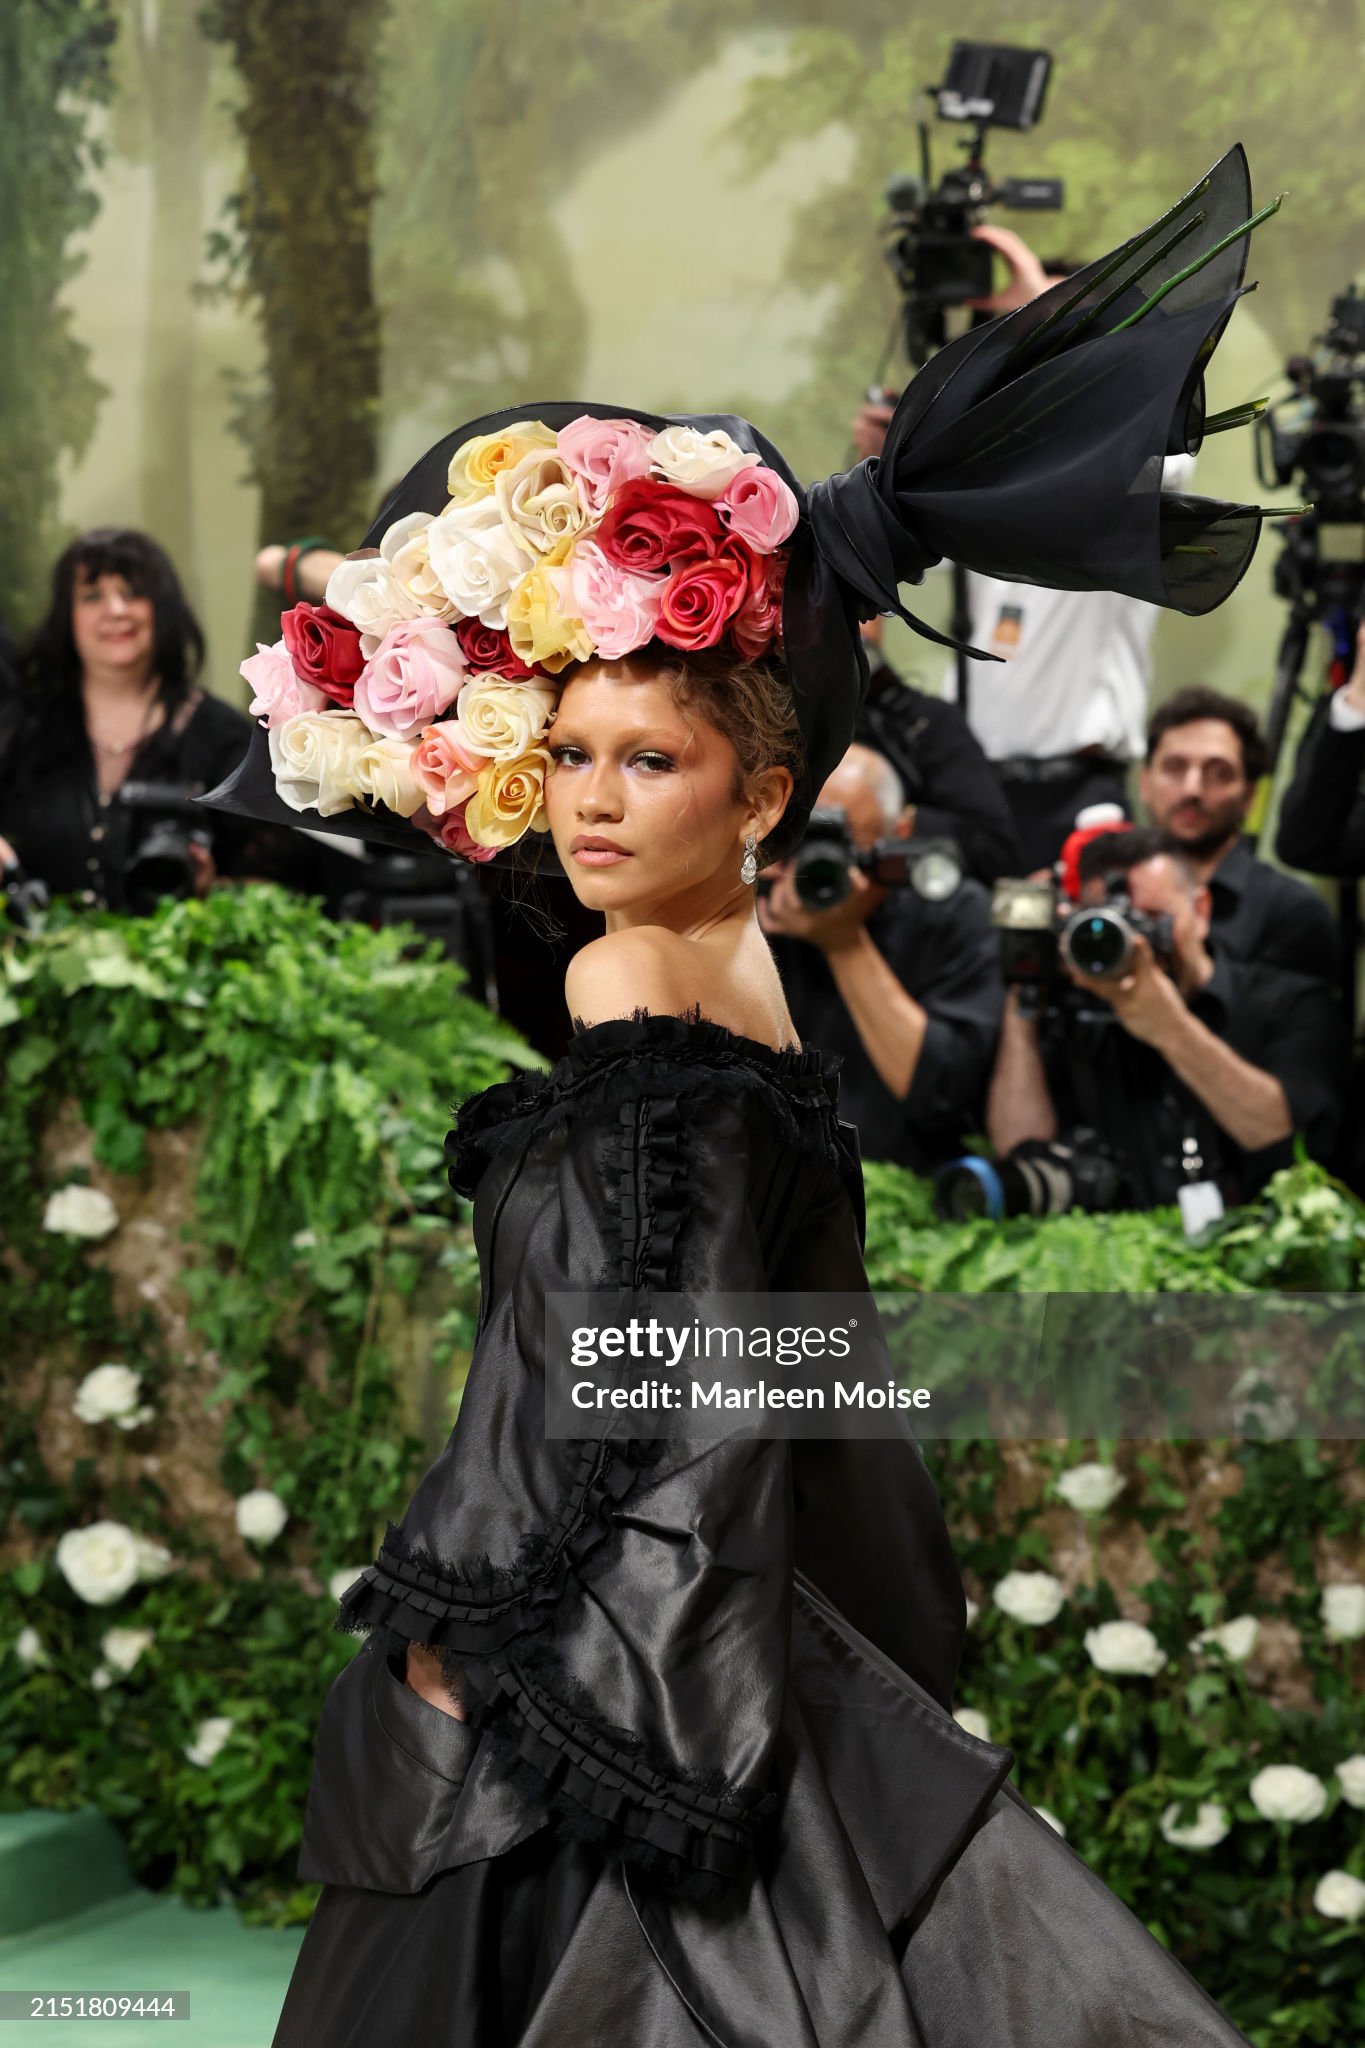 gettyimages-2151809444-2048x2048.jpg